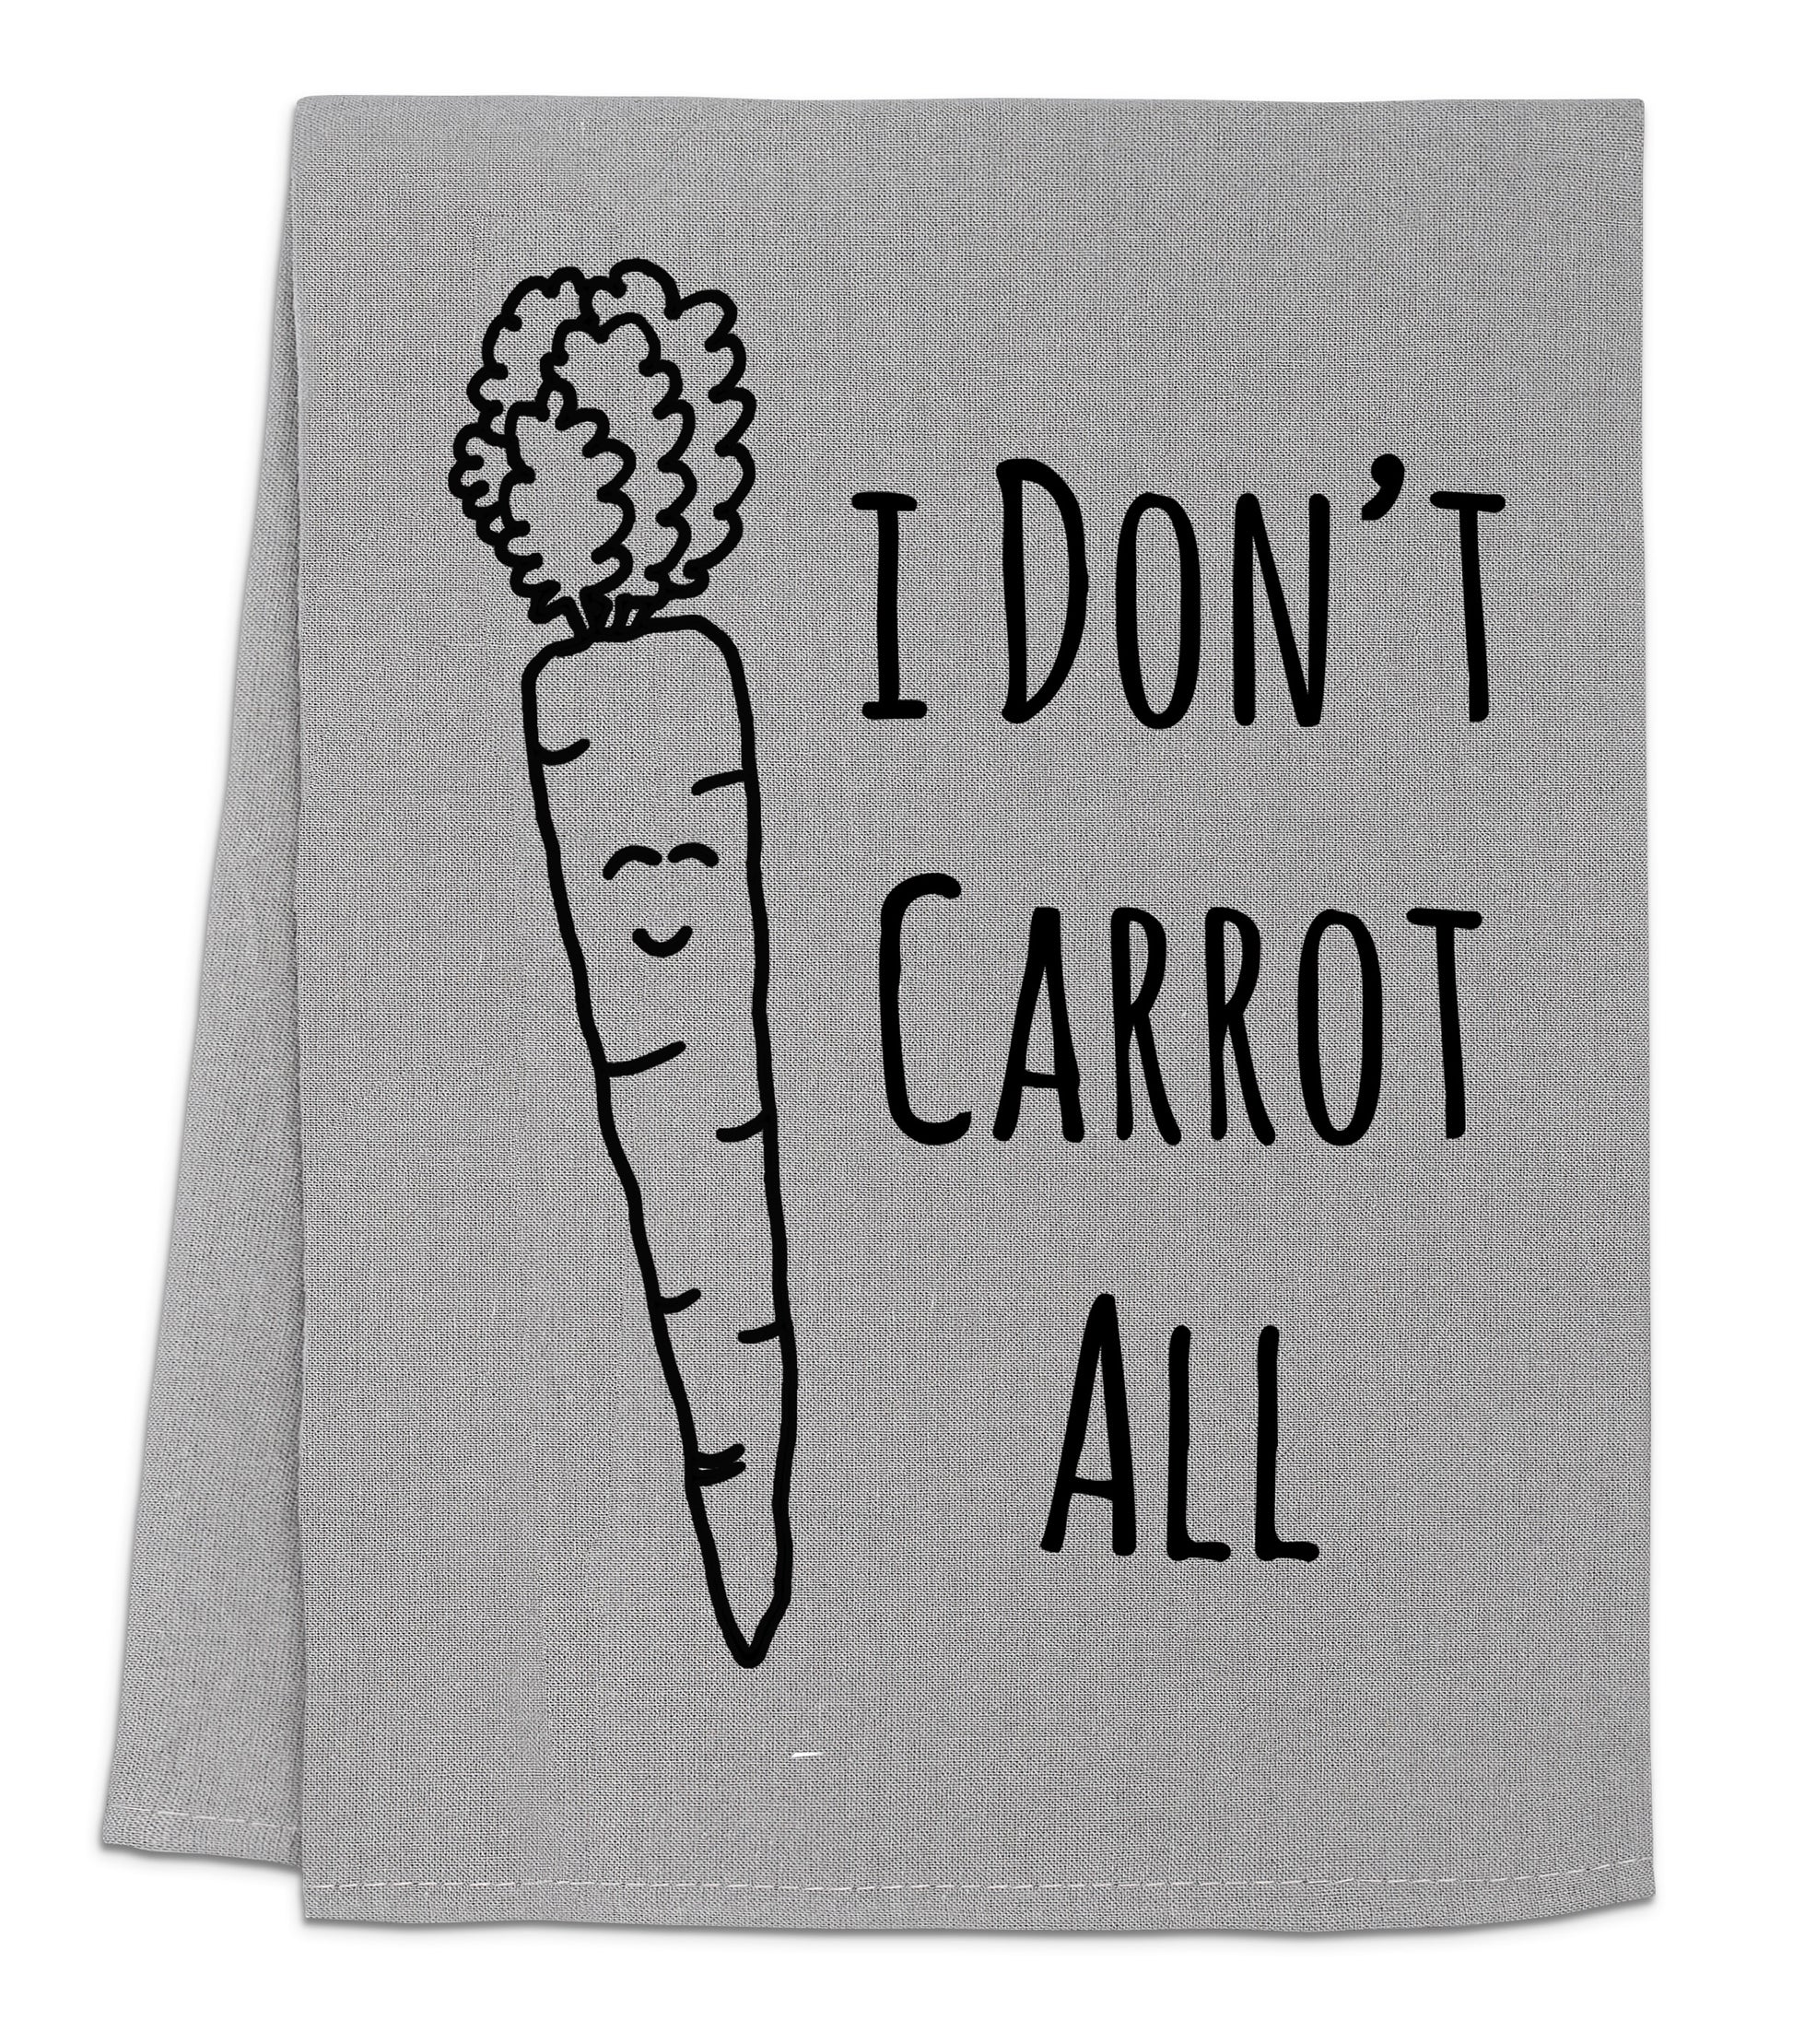 a towel with a carrot drawn on it